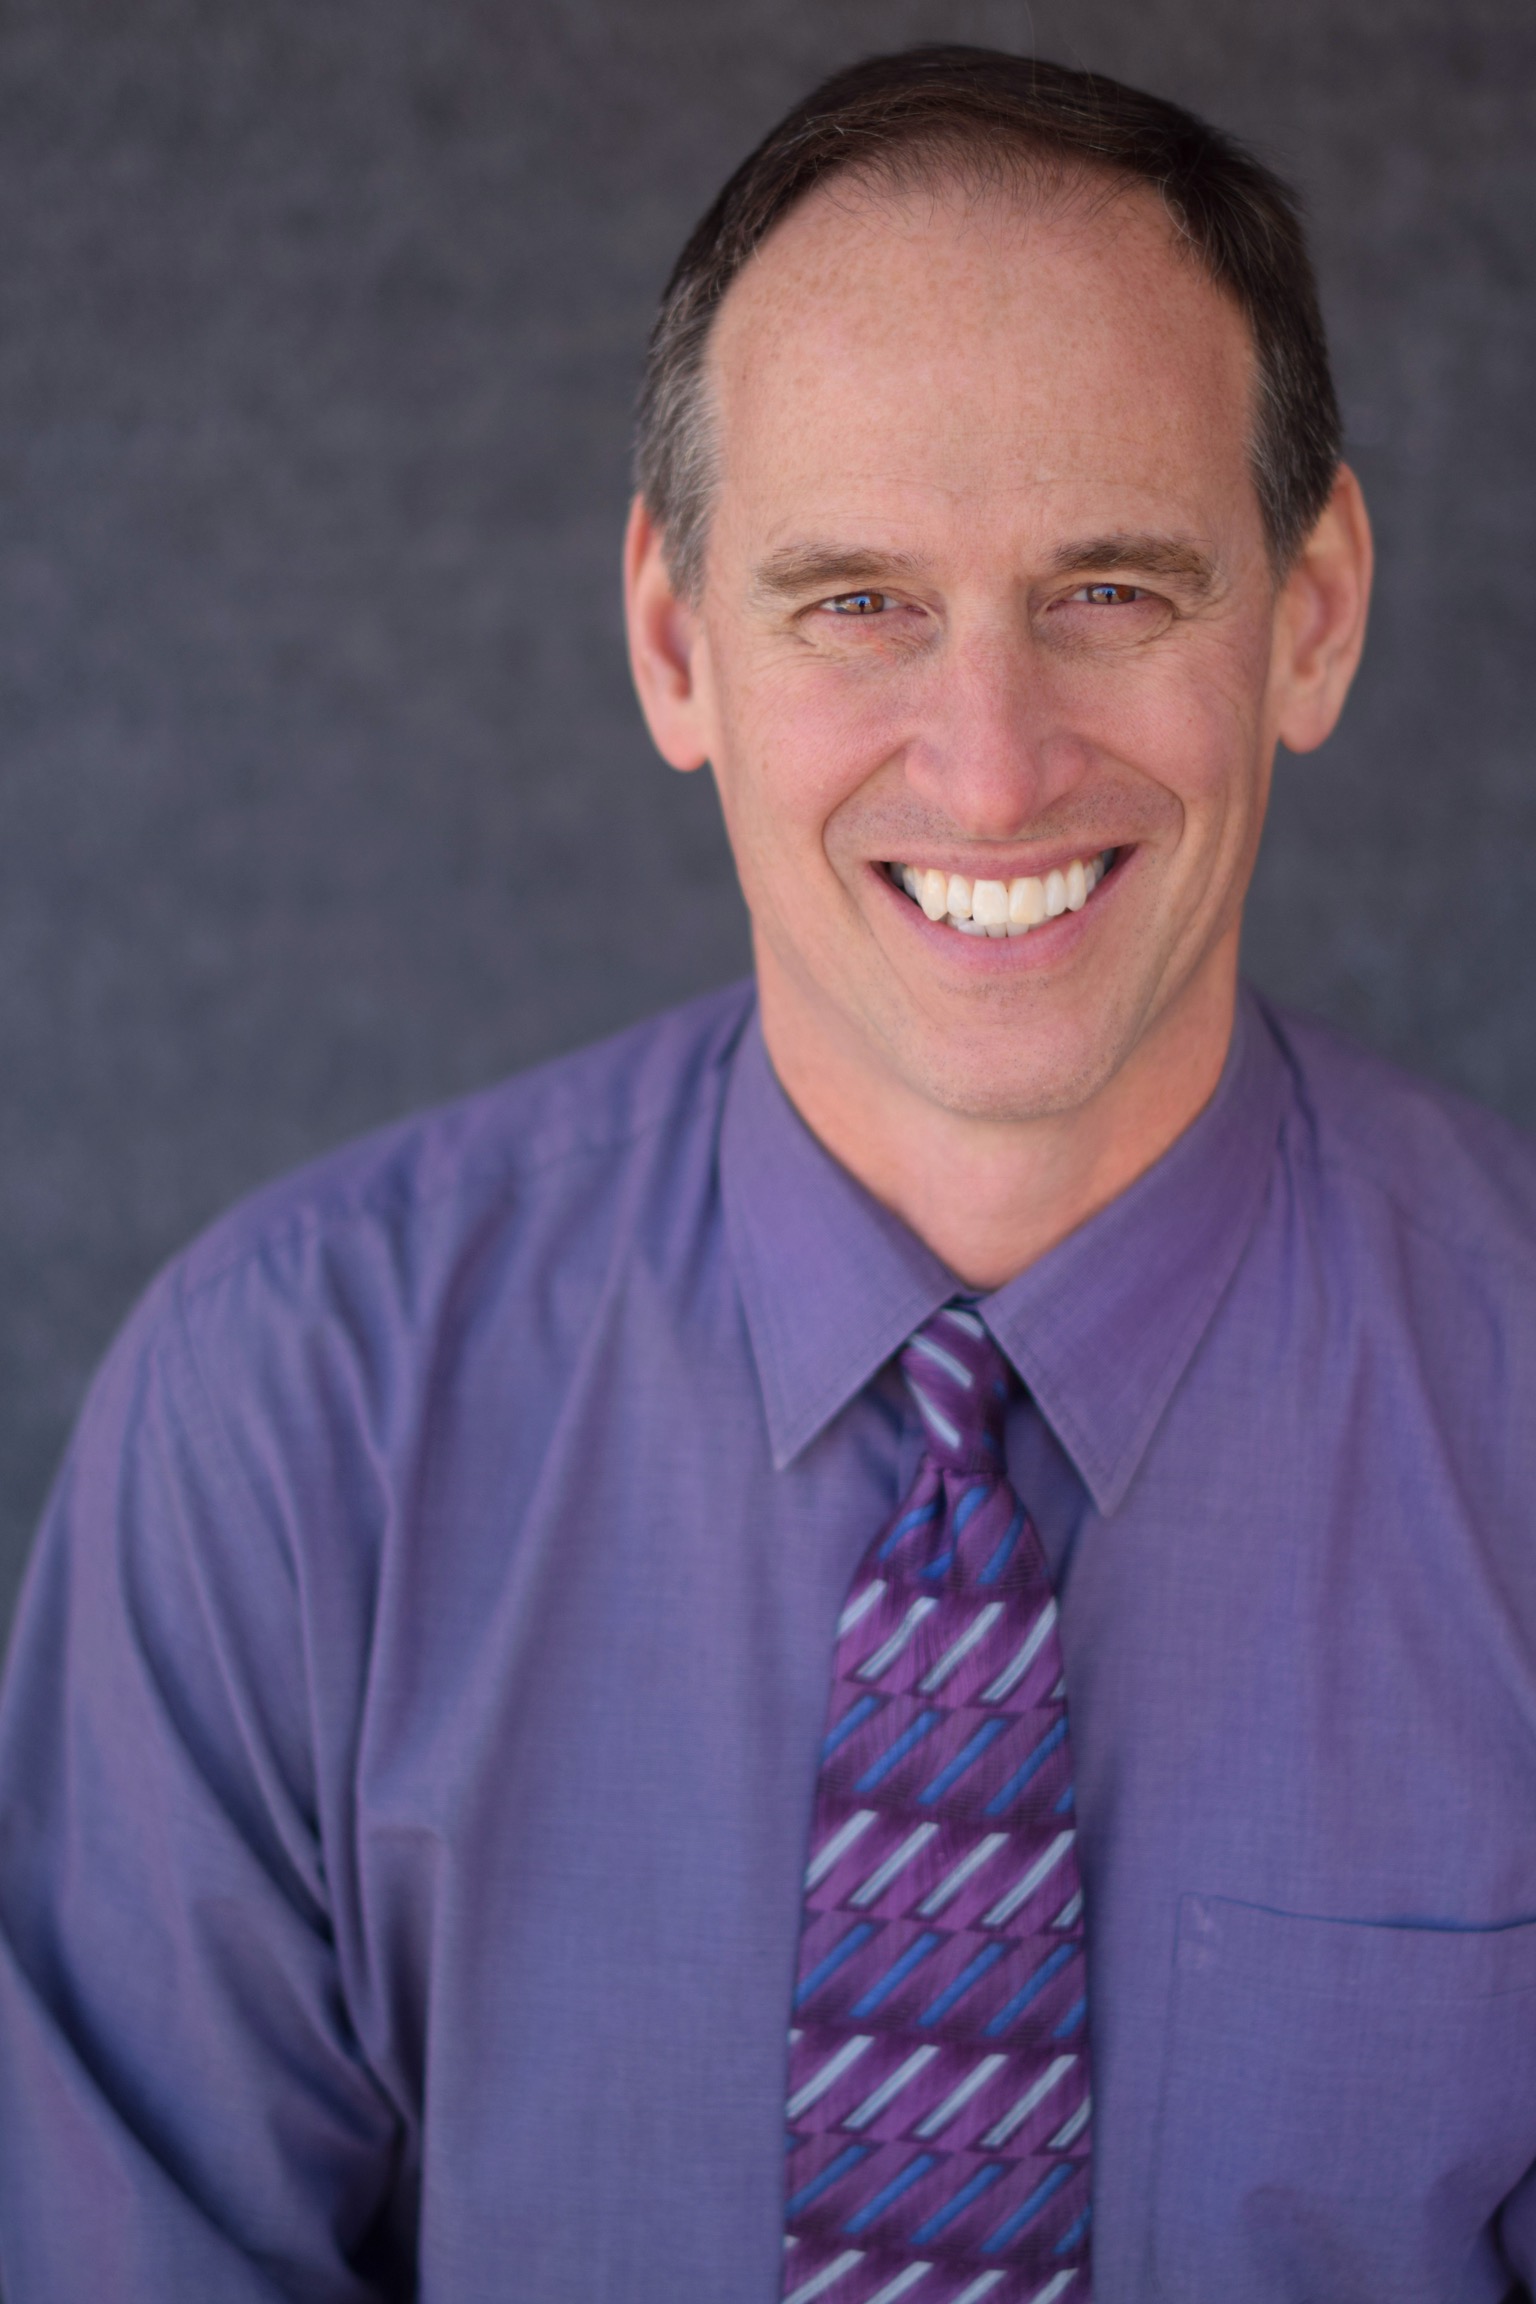 Dr Becker, Eau Claire and Chippewa Falls Chiropractor